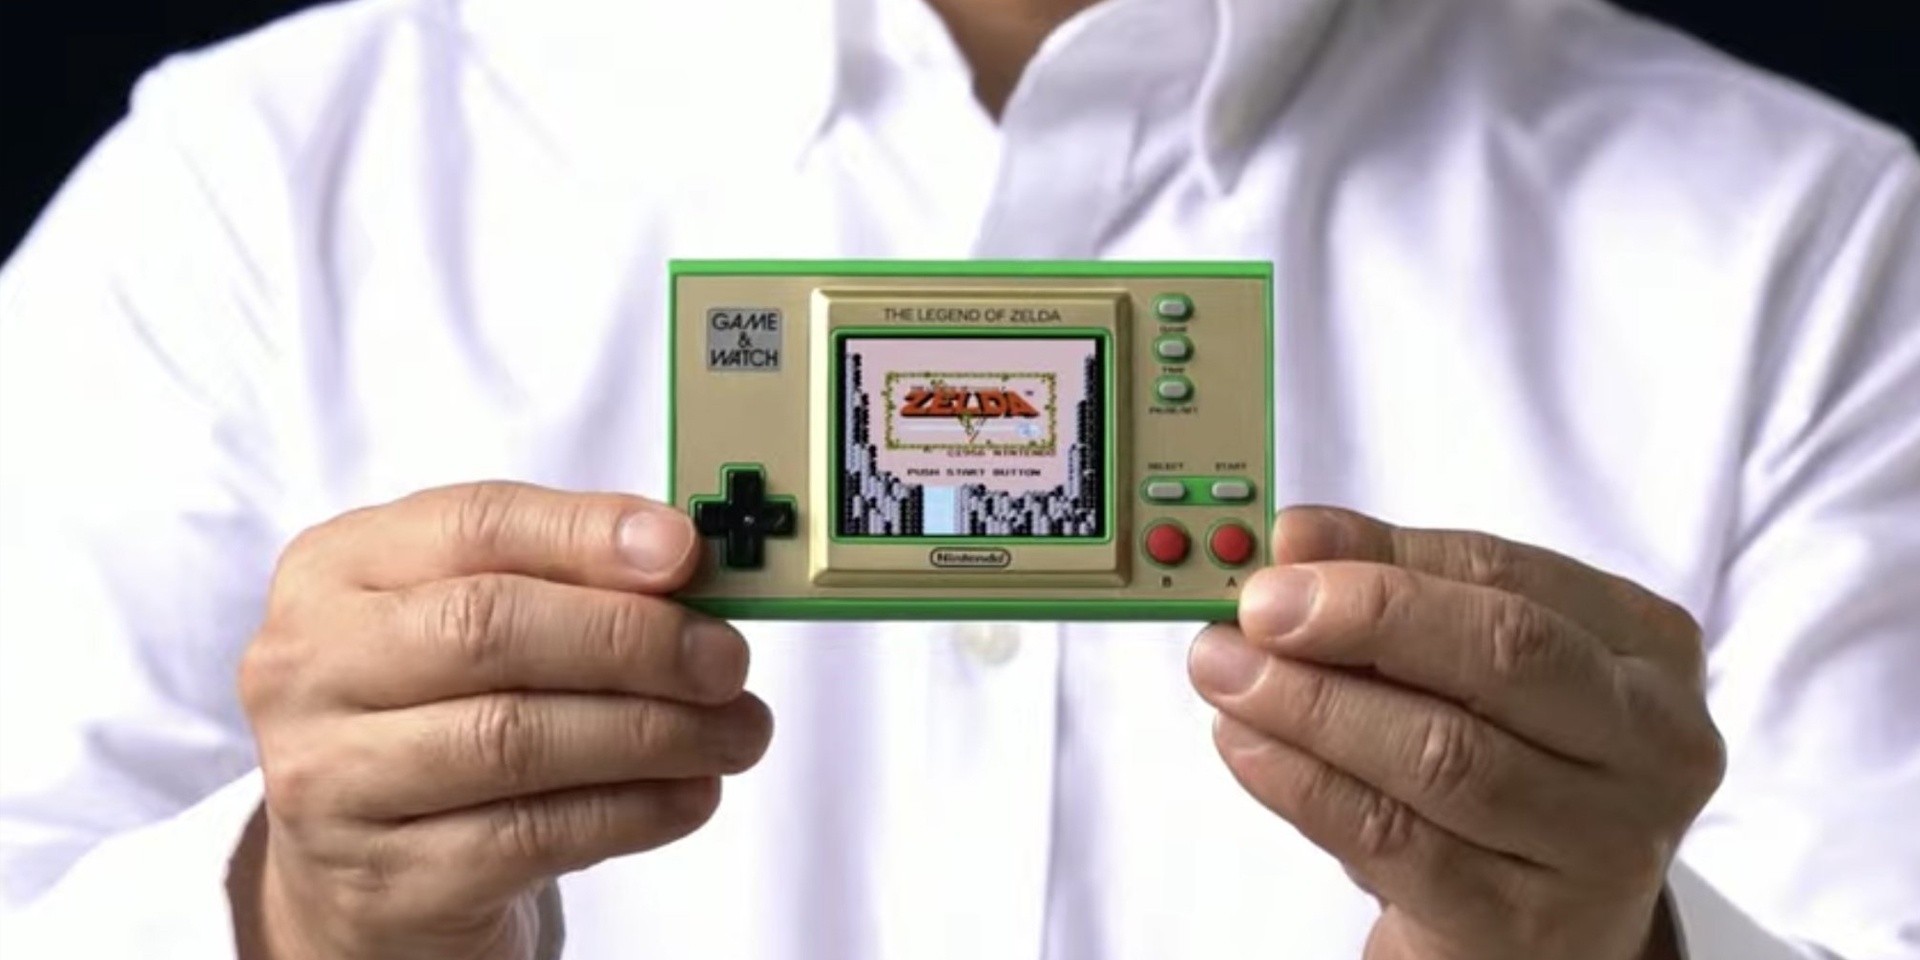 Nintendo to celebrate The Legend of Zelda's 35th anniversary with special edition Game & Watch